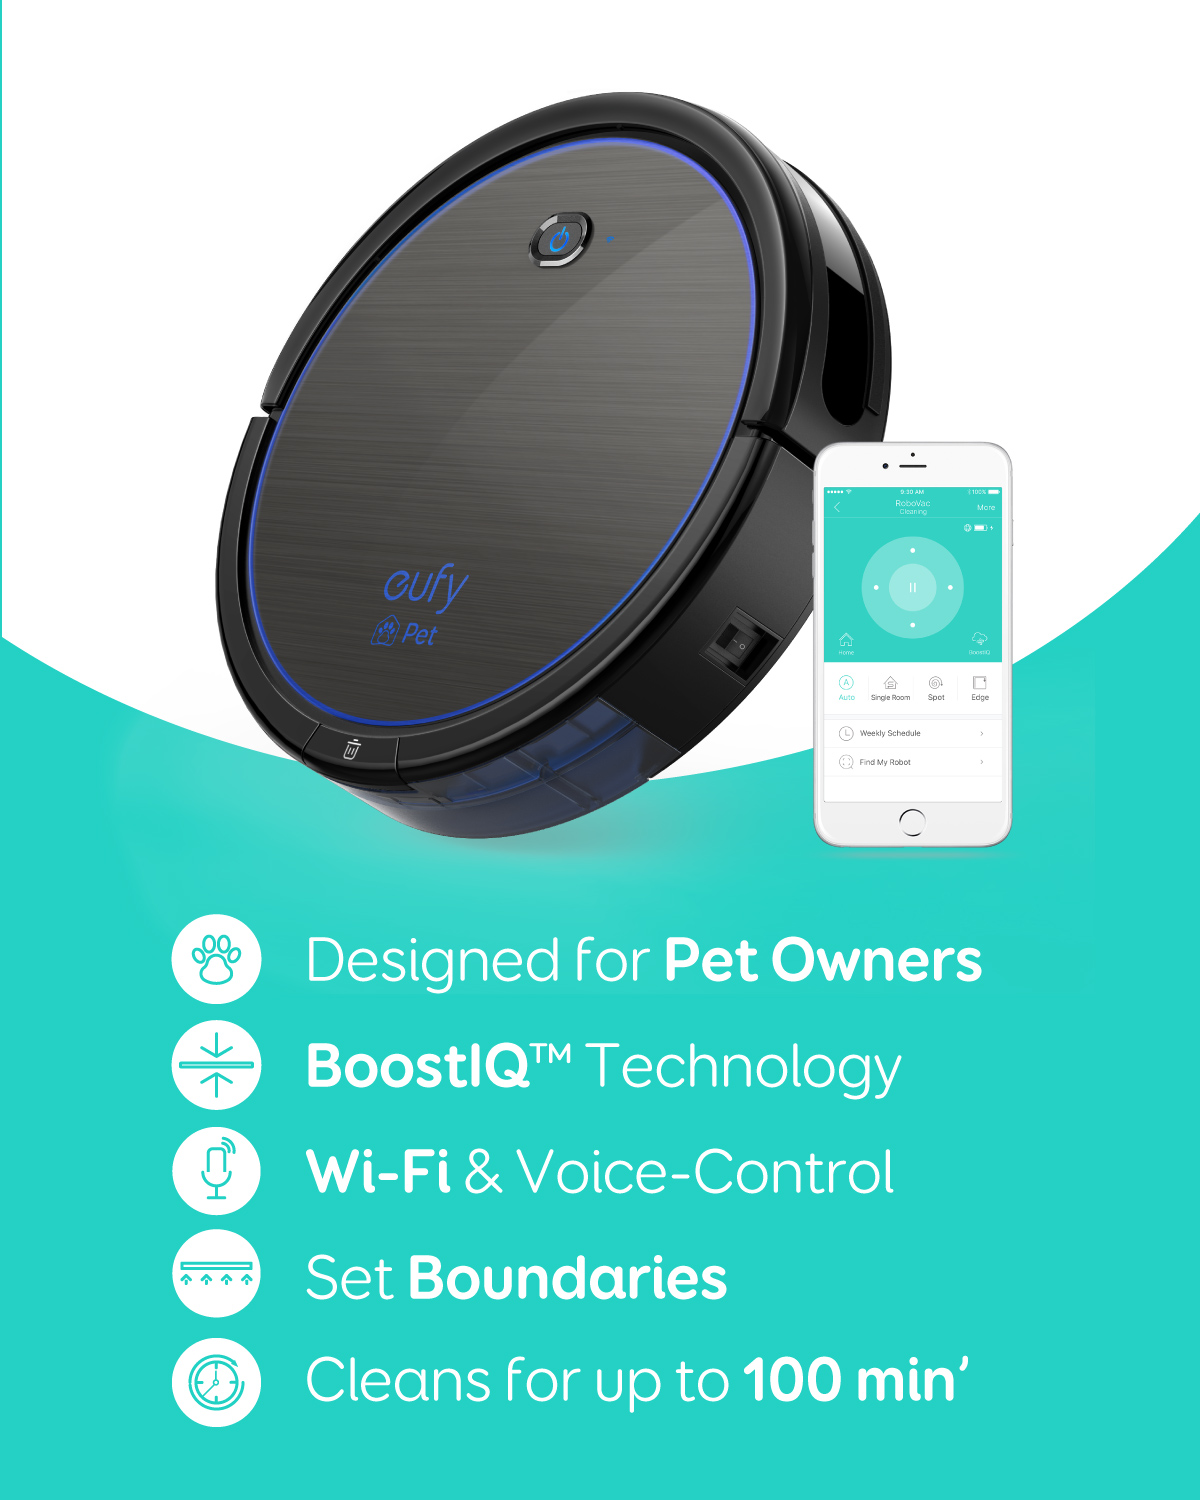 Anker eufy RoboVac 11c Pet Edition Wi-Fi Connected Robot Vacuum - image 2 of 9